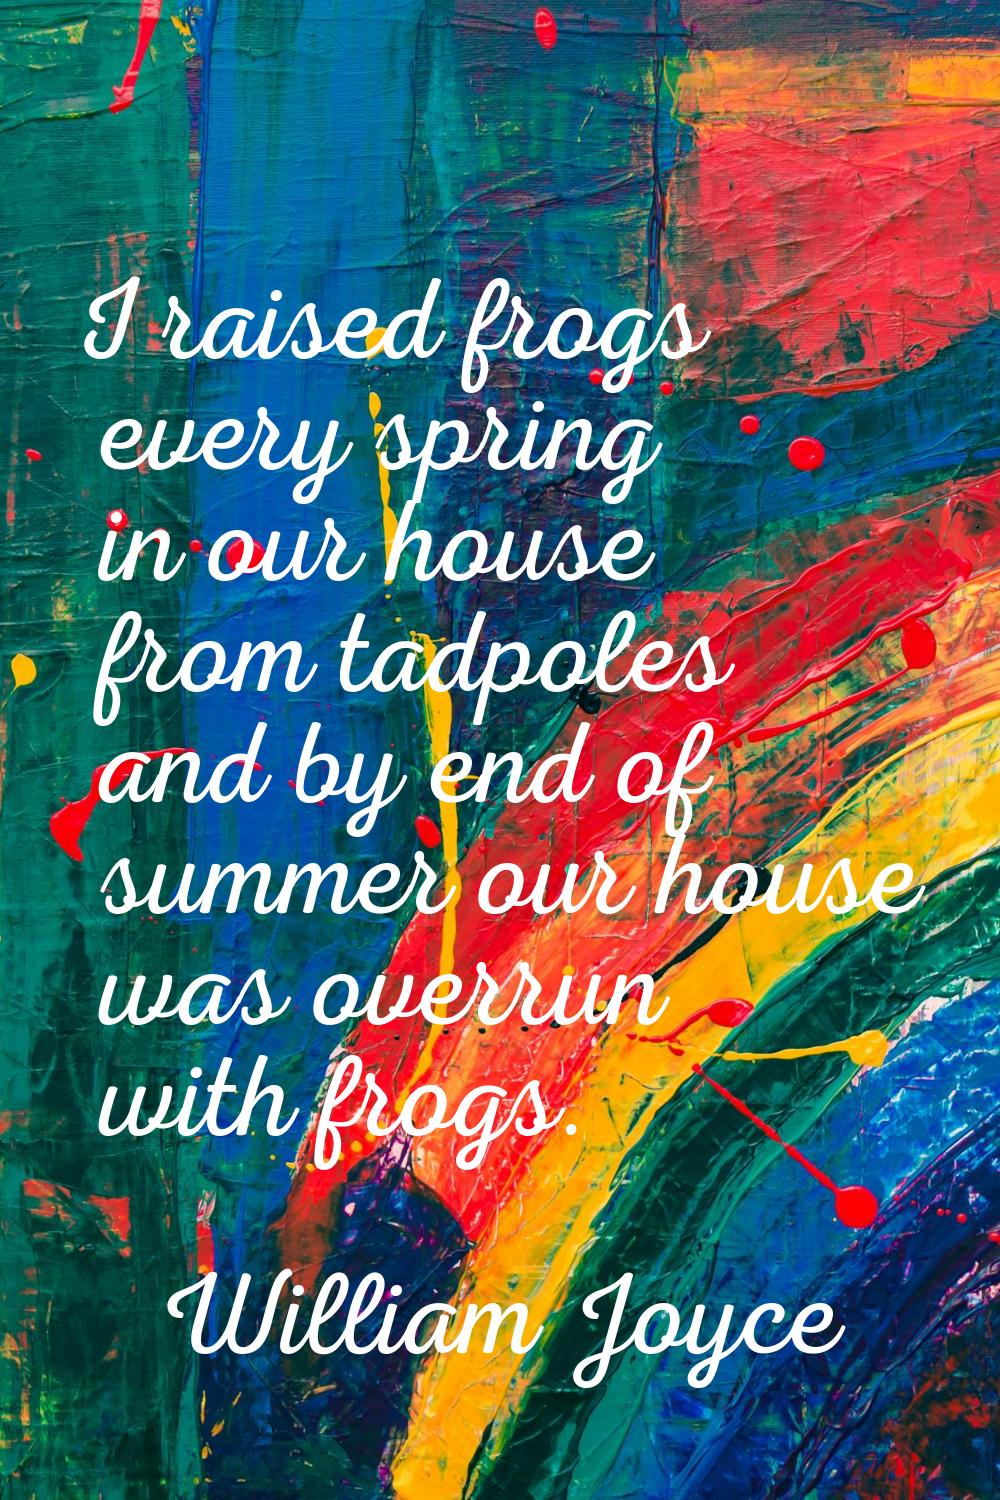 I raised frogs every spring in our house from tadpoles and by end of summer our house was overrun w